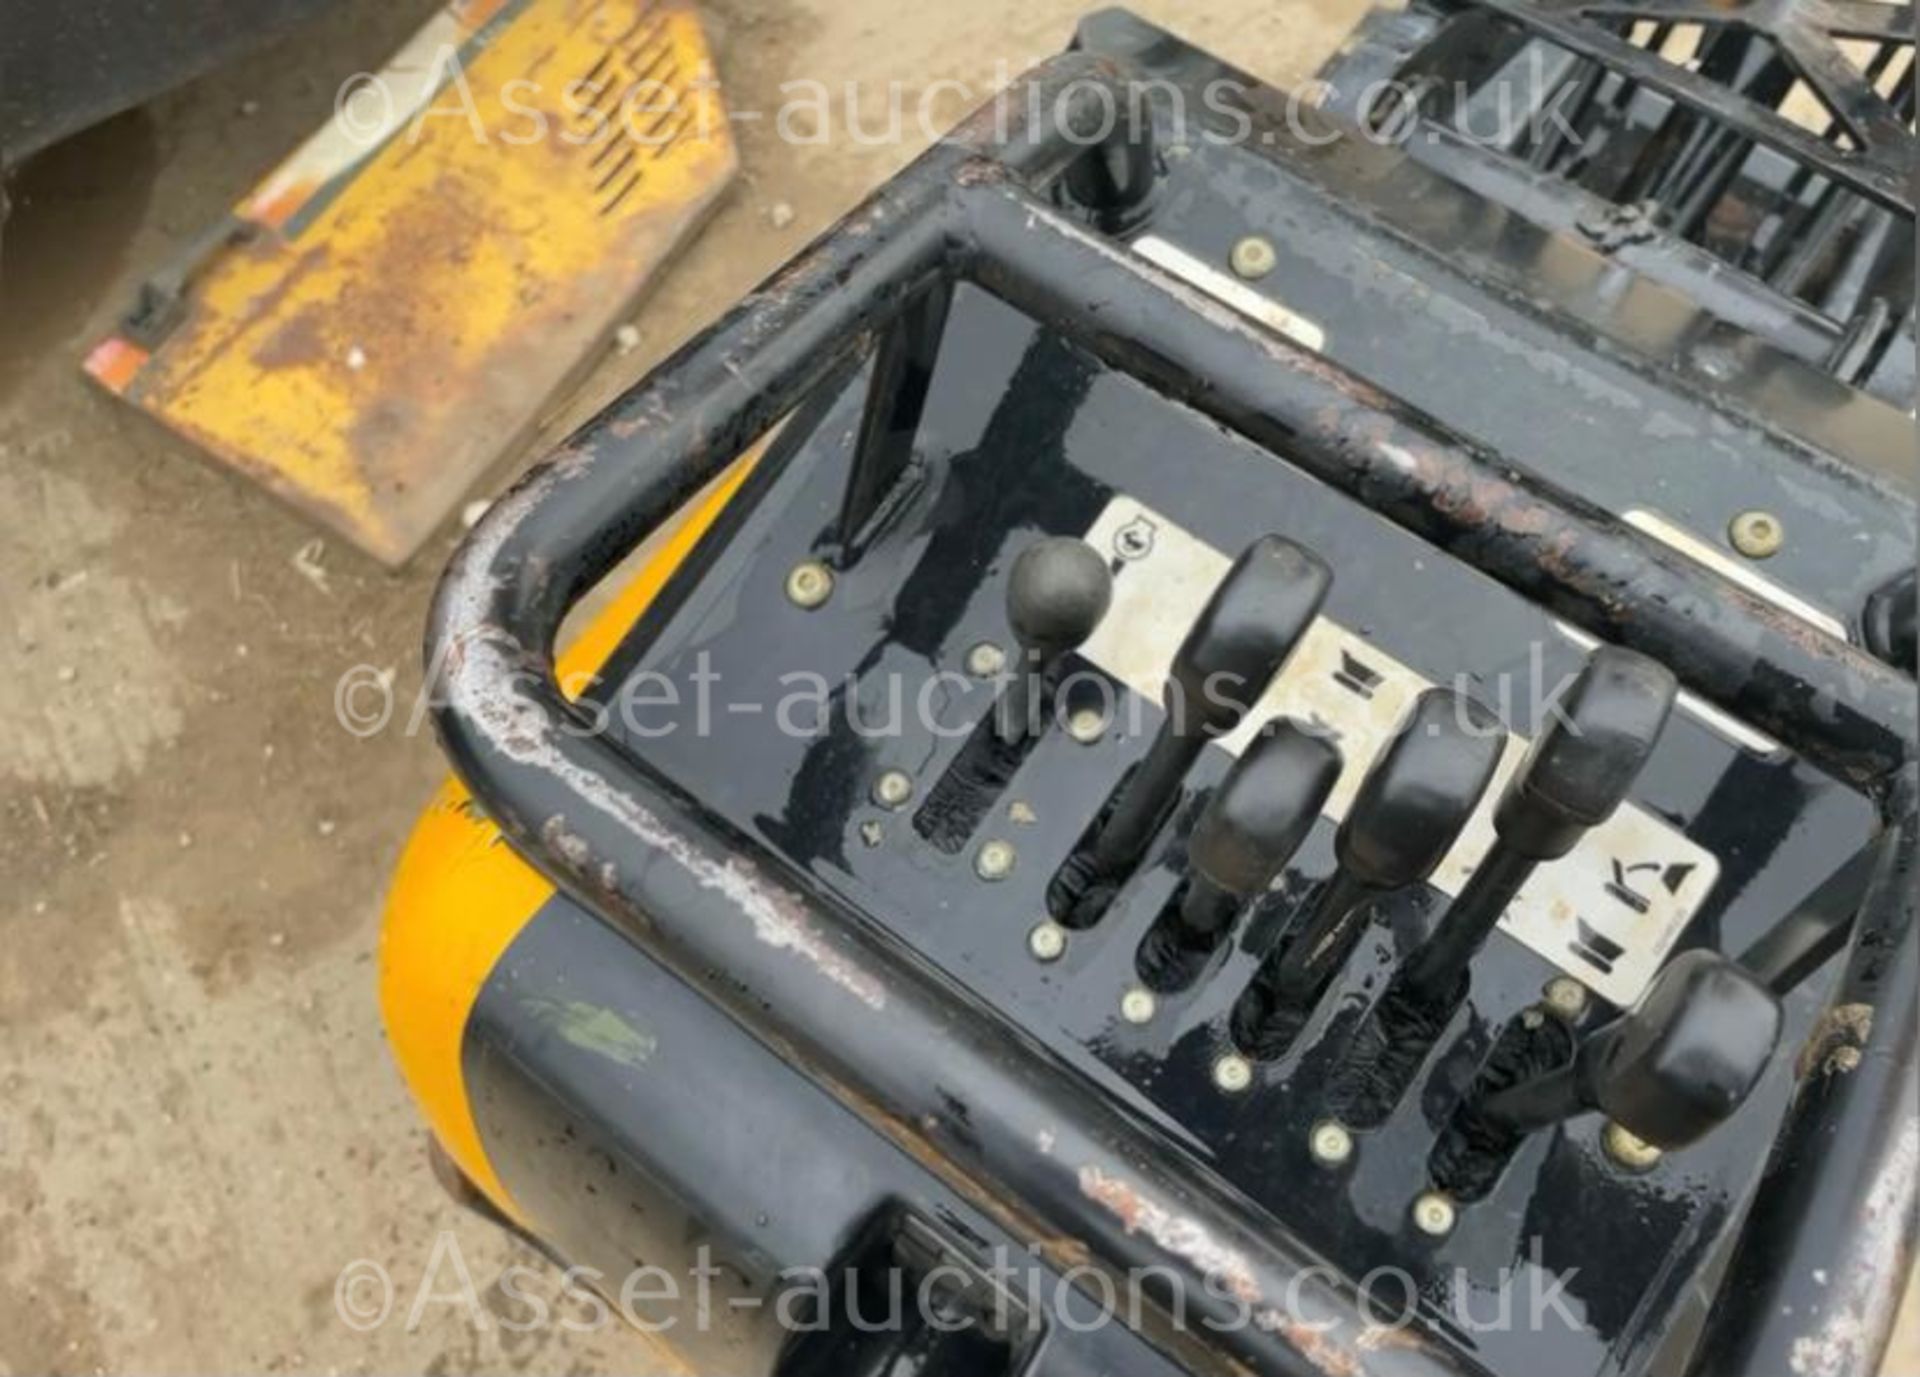 2019 JCB HTD-5 DIESEL TRACKED DUMPER, RUNS DRIVES AND WORKS WELL, ELECTRIC OR PULL START *PLUS VAT* - Image 15 of 20